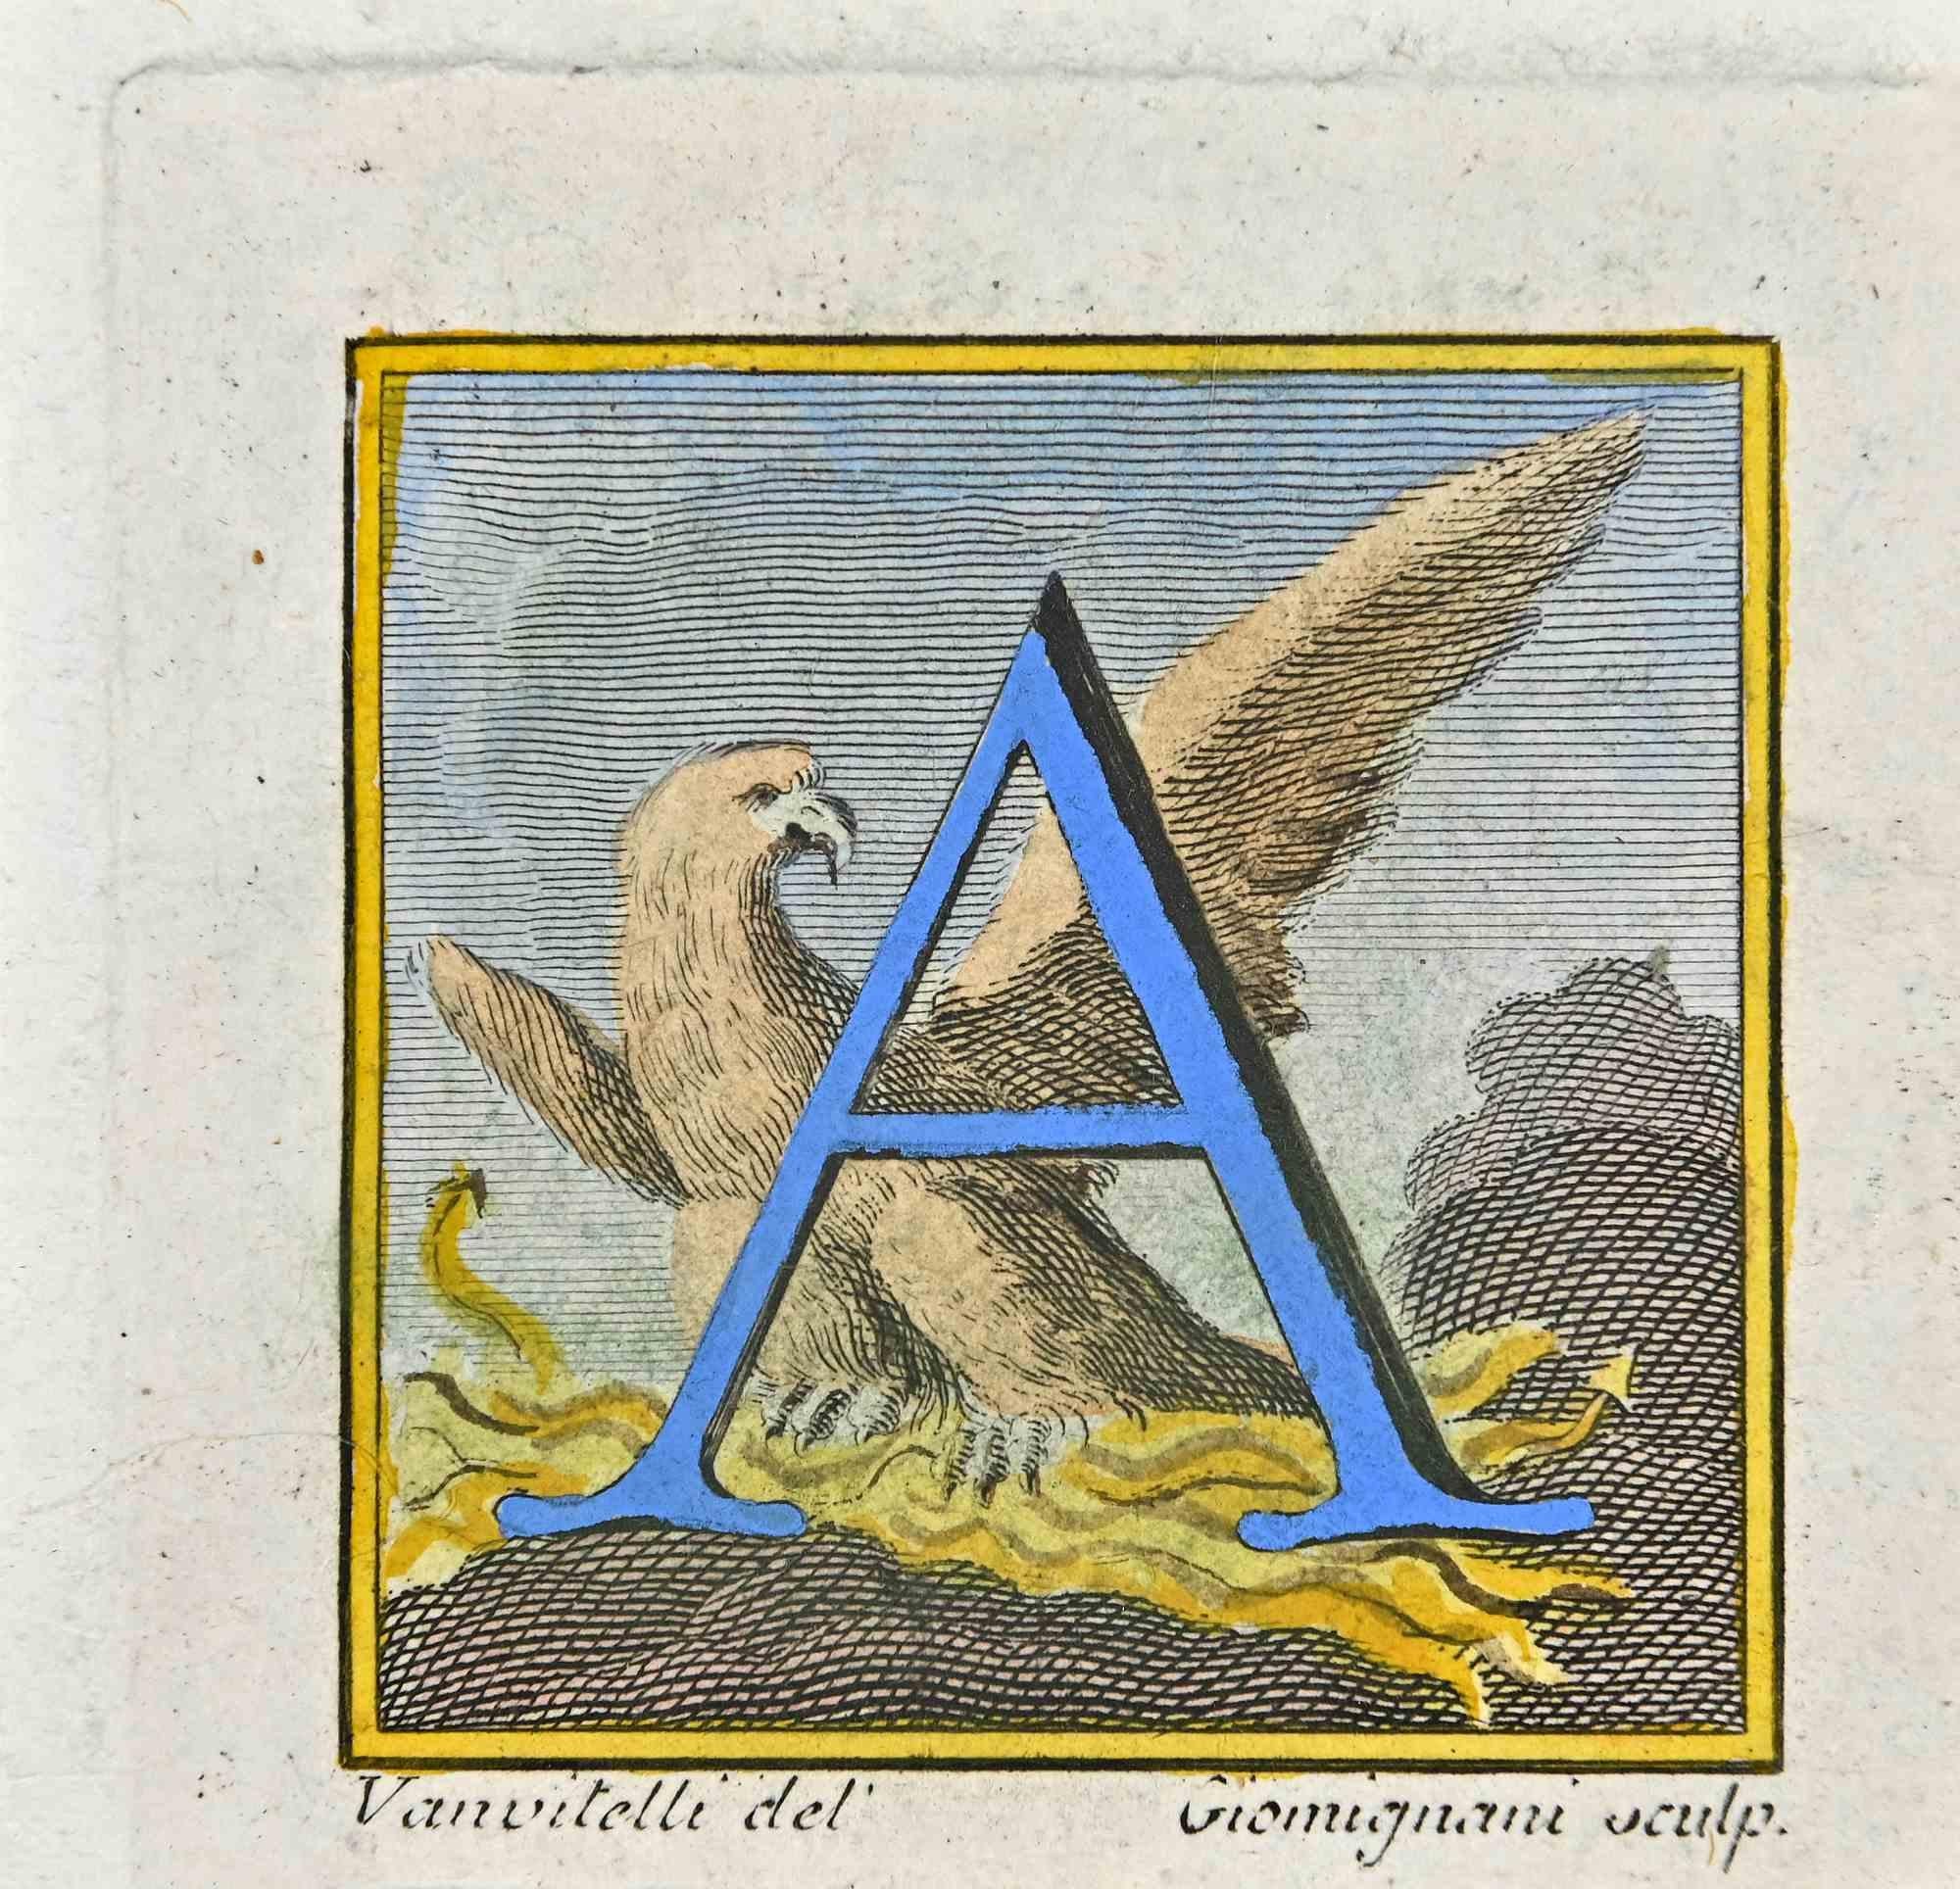 Unknown Figurative Print - Letter of the Alphabet A - Etching - 18th Century